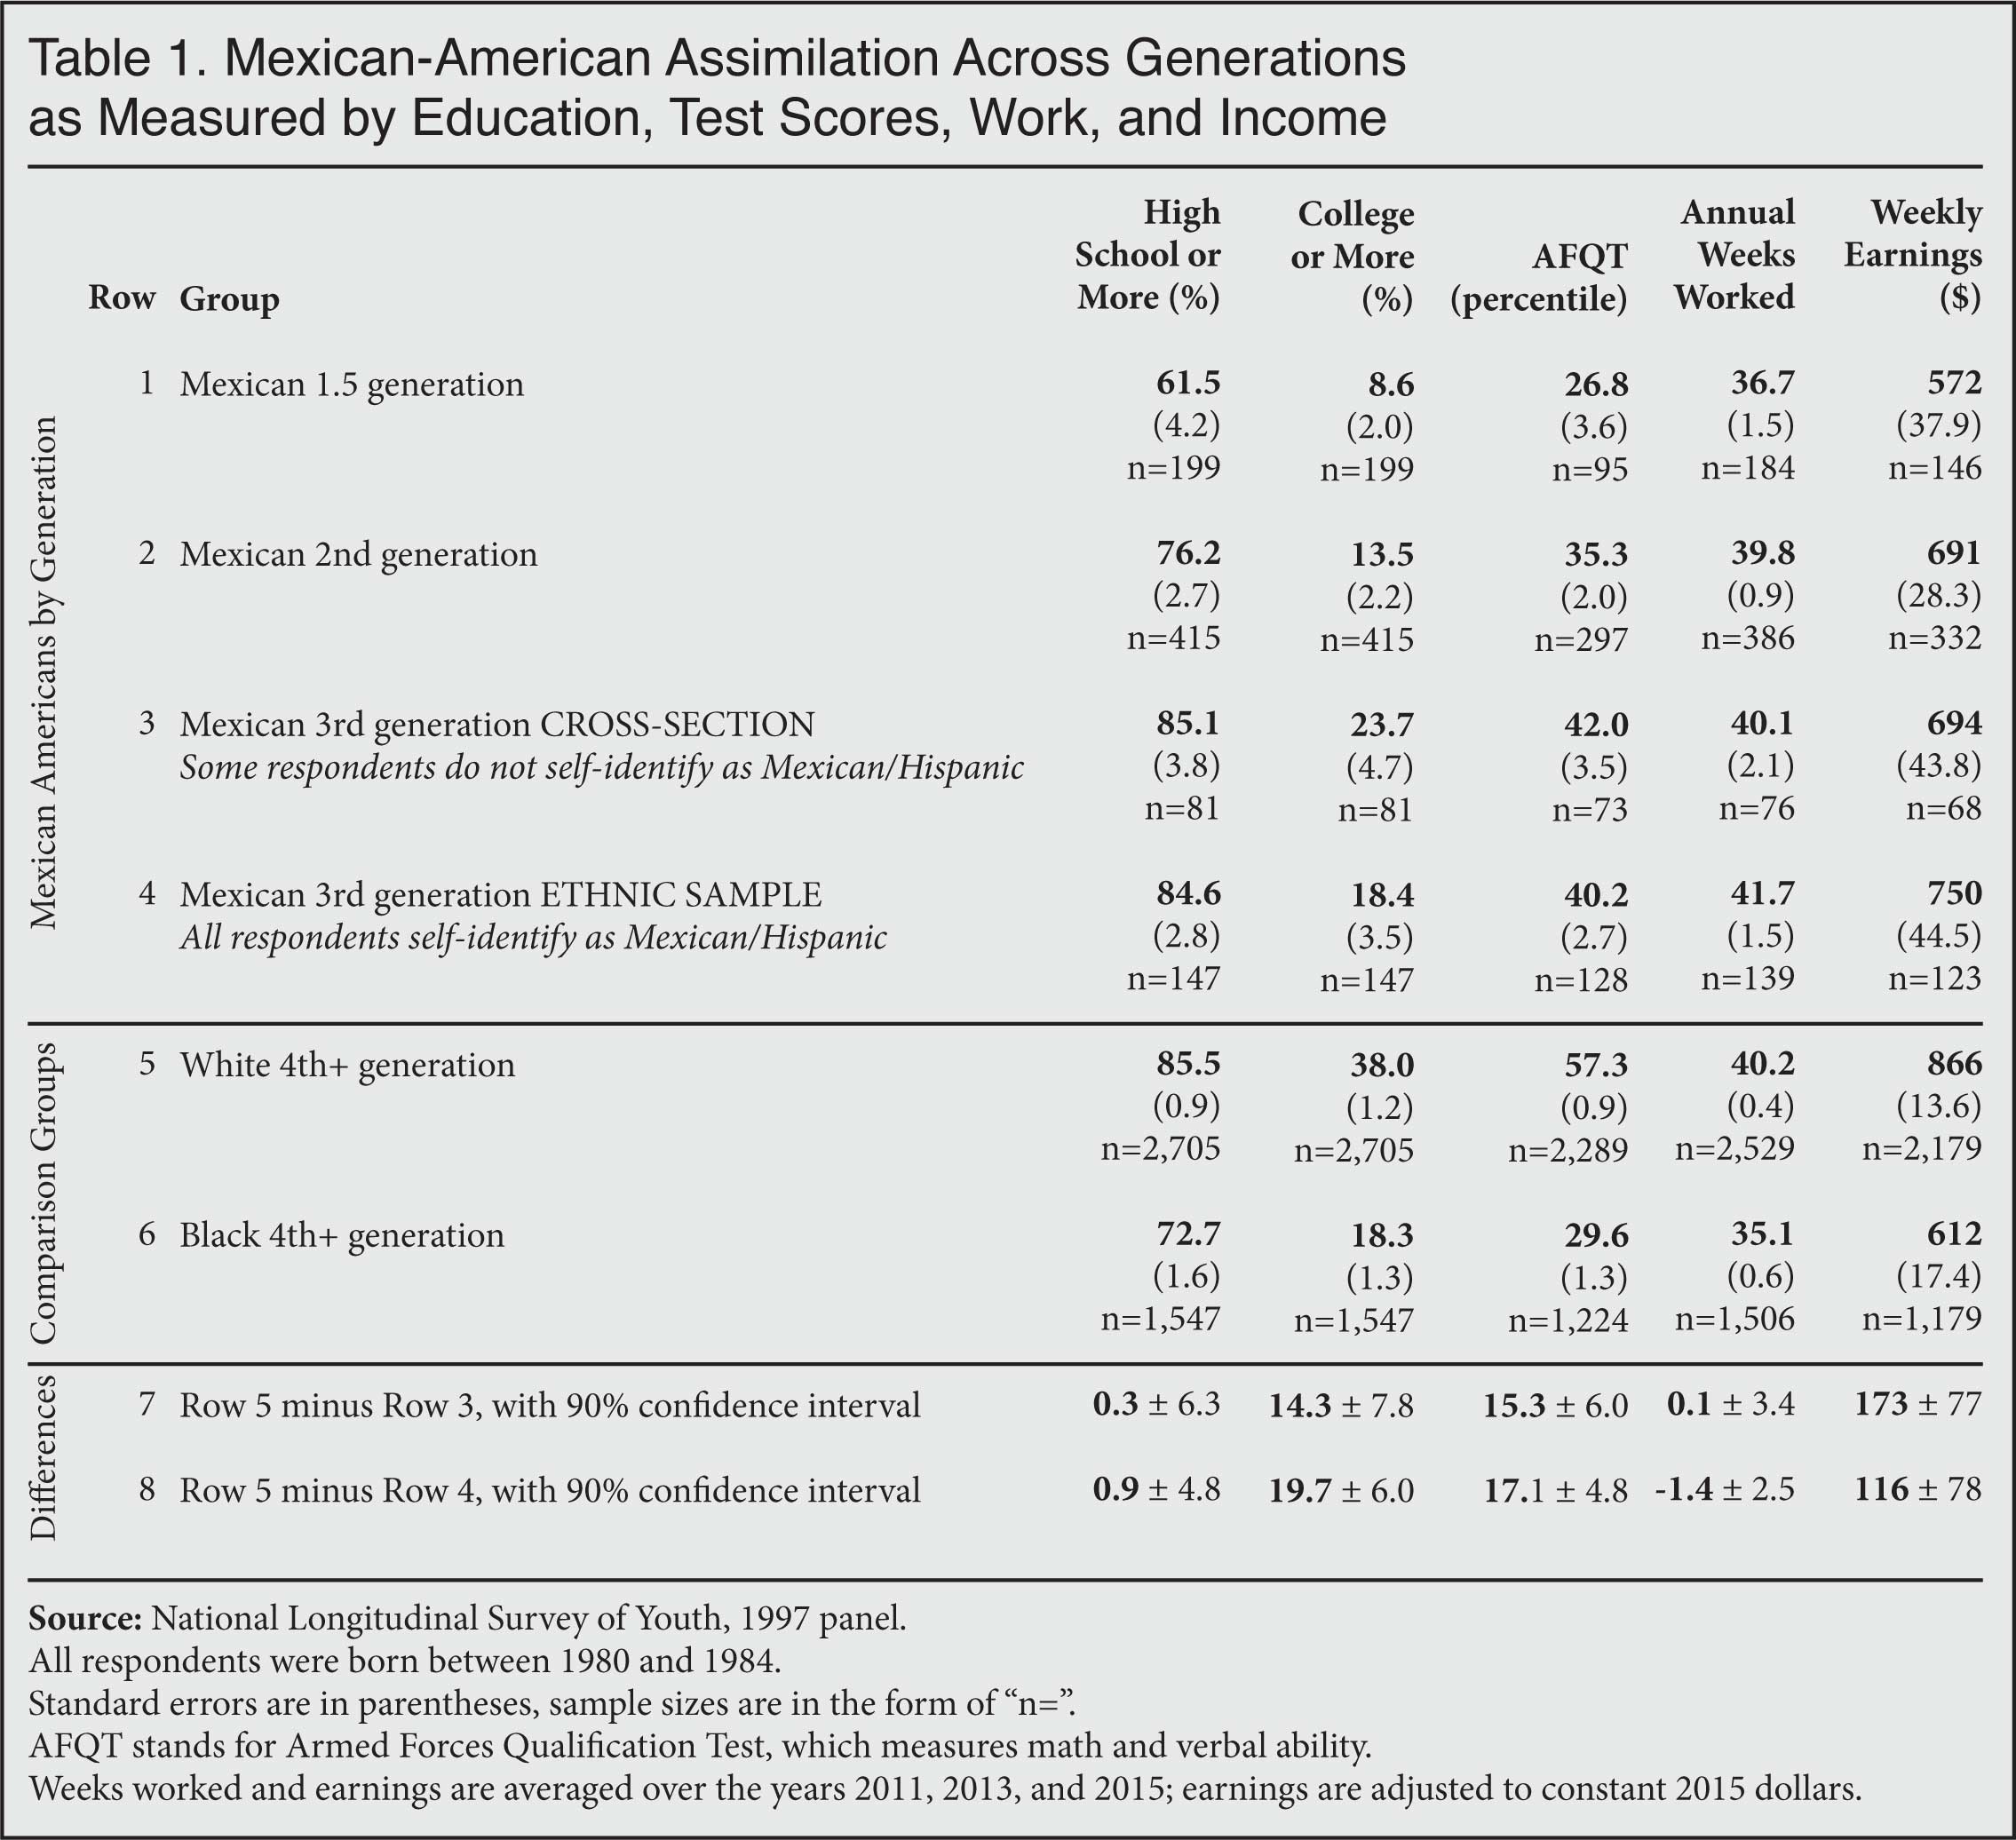 Table: Mexican American Assimilation Across Generations as Measured by Education, Test Scores, and Income